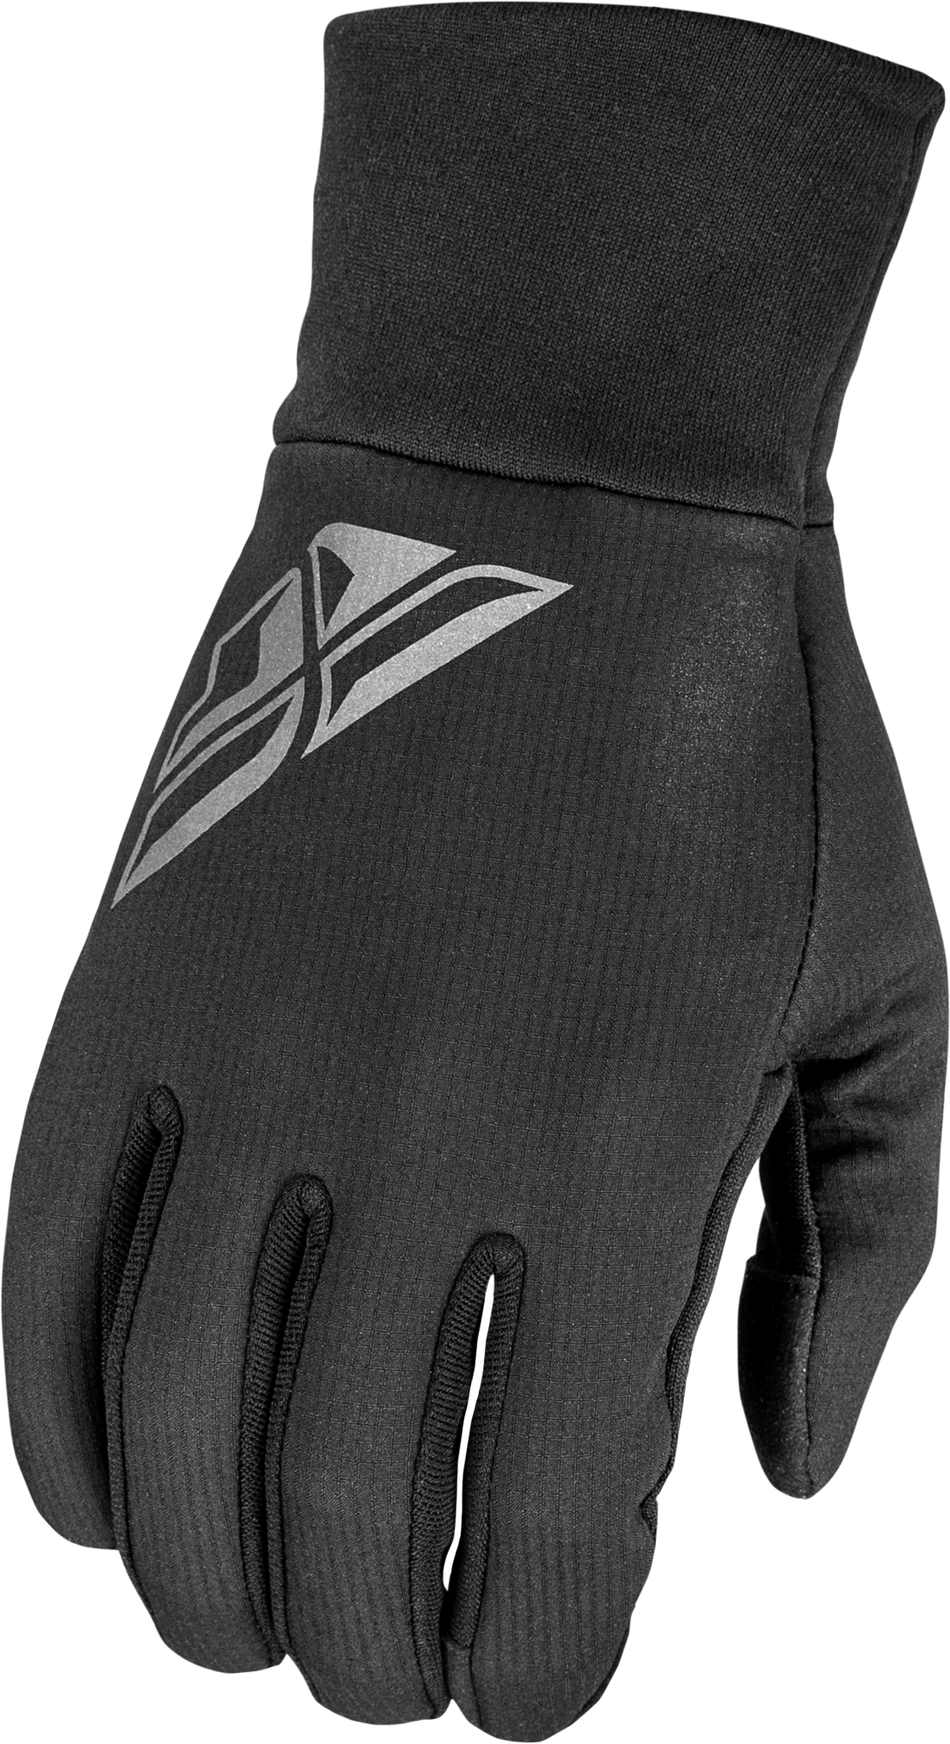 FLY RACING Glove Liners Black Md 363-3960M